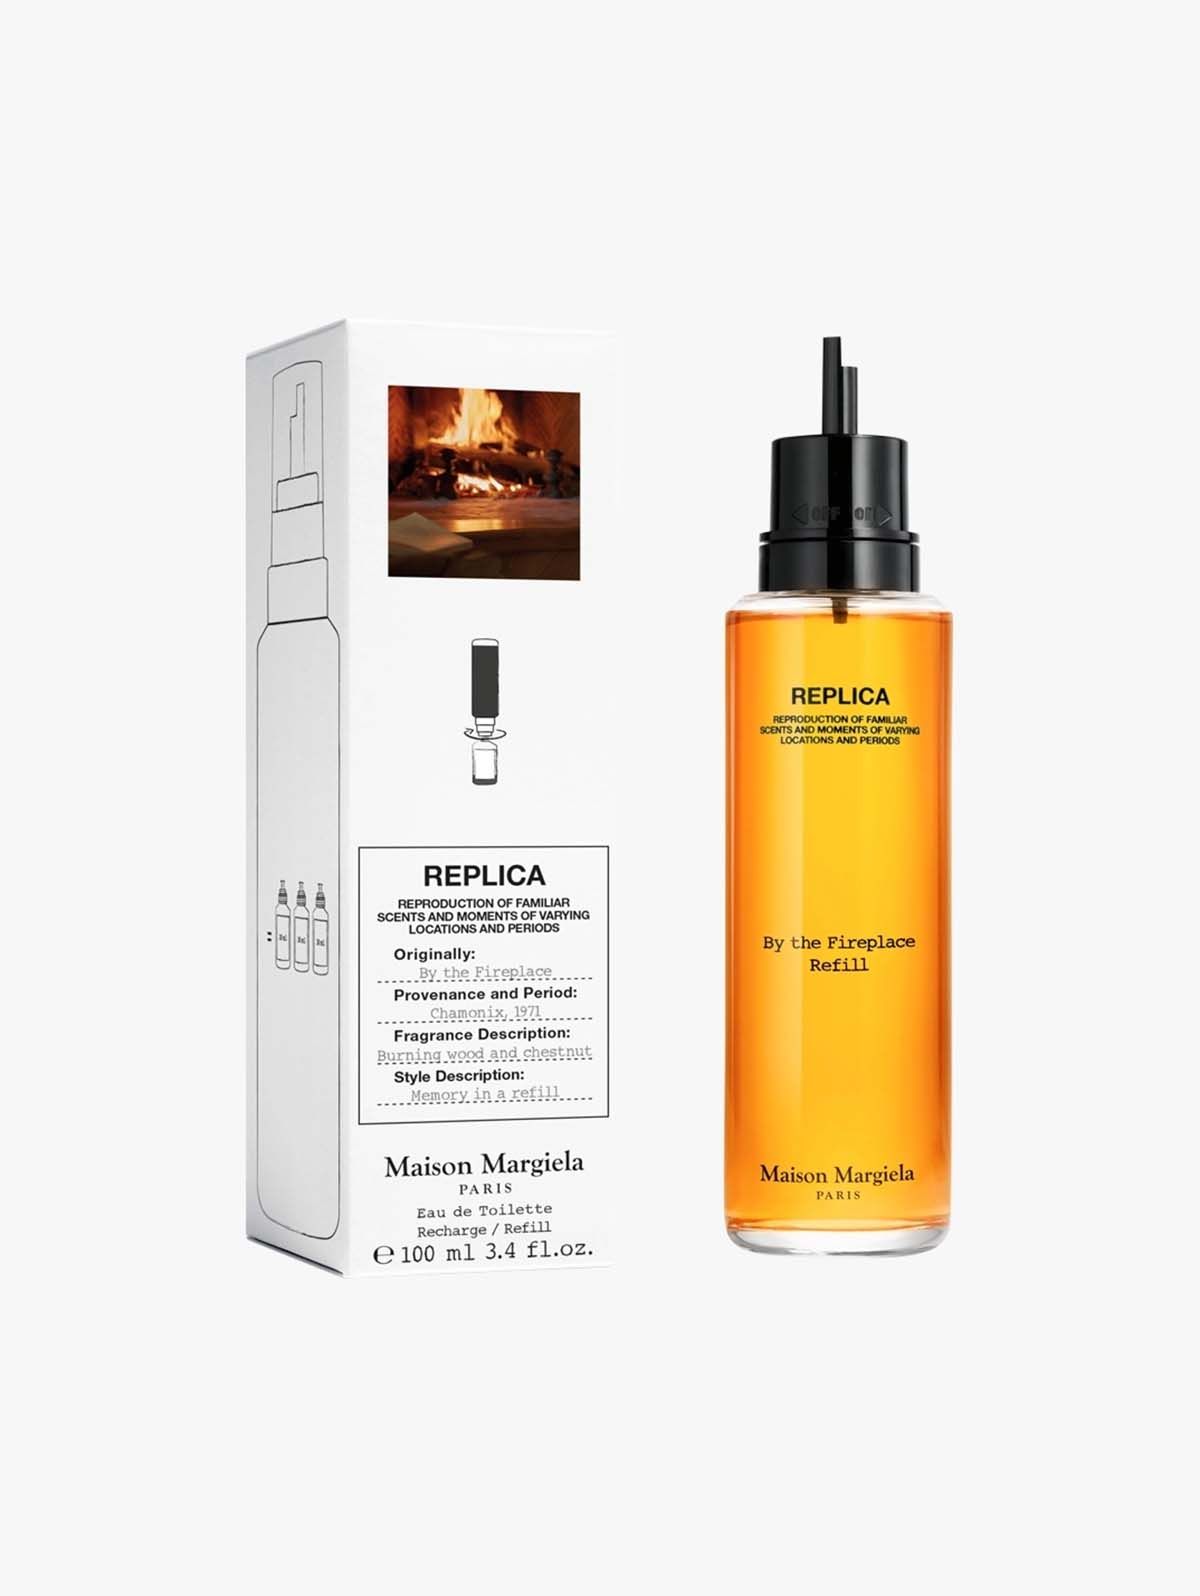 Maison Margiela Replica By the Fireplace Refill 100ml | L'Oréal Family ...